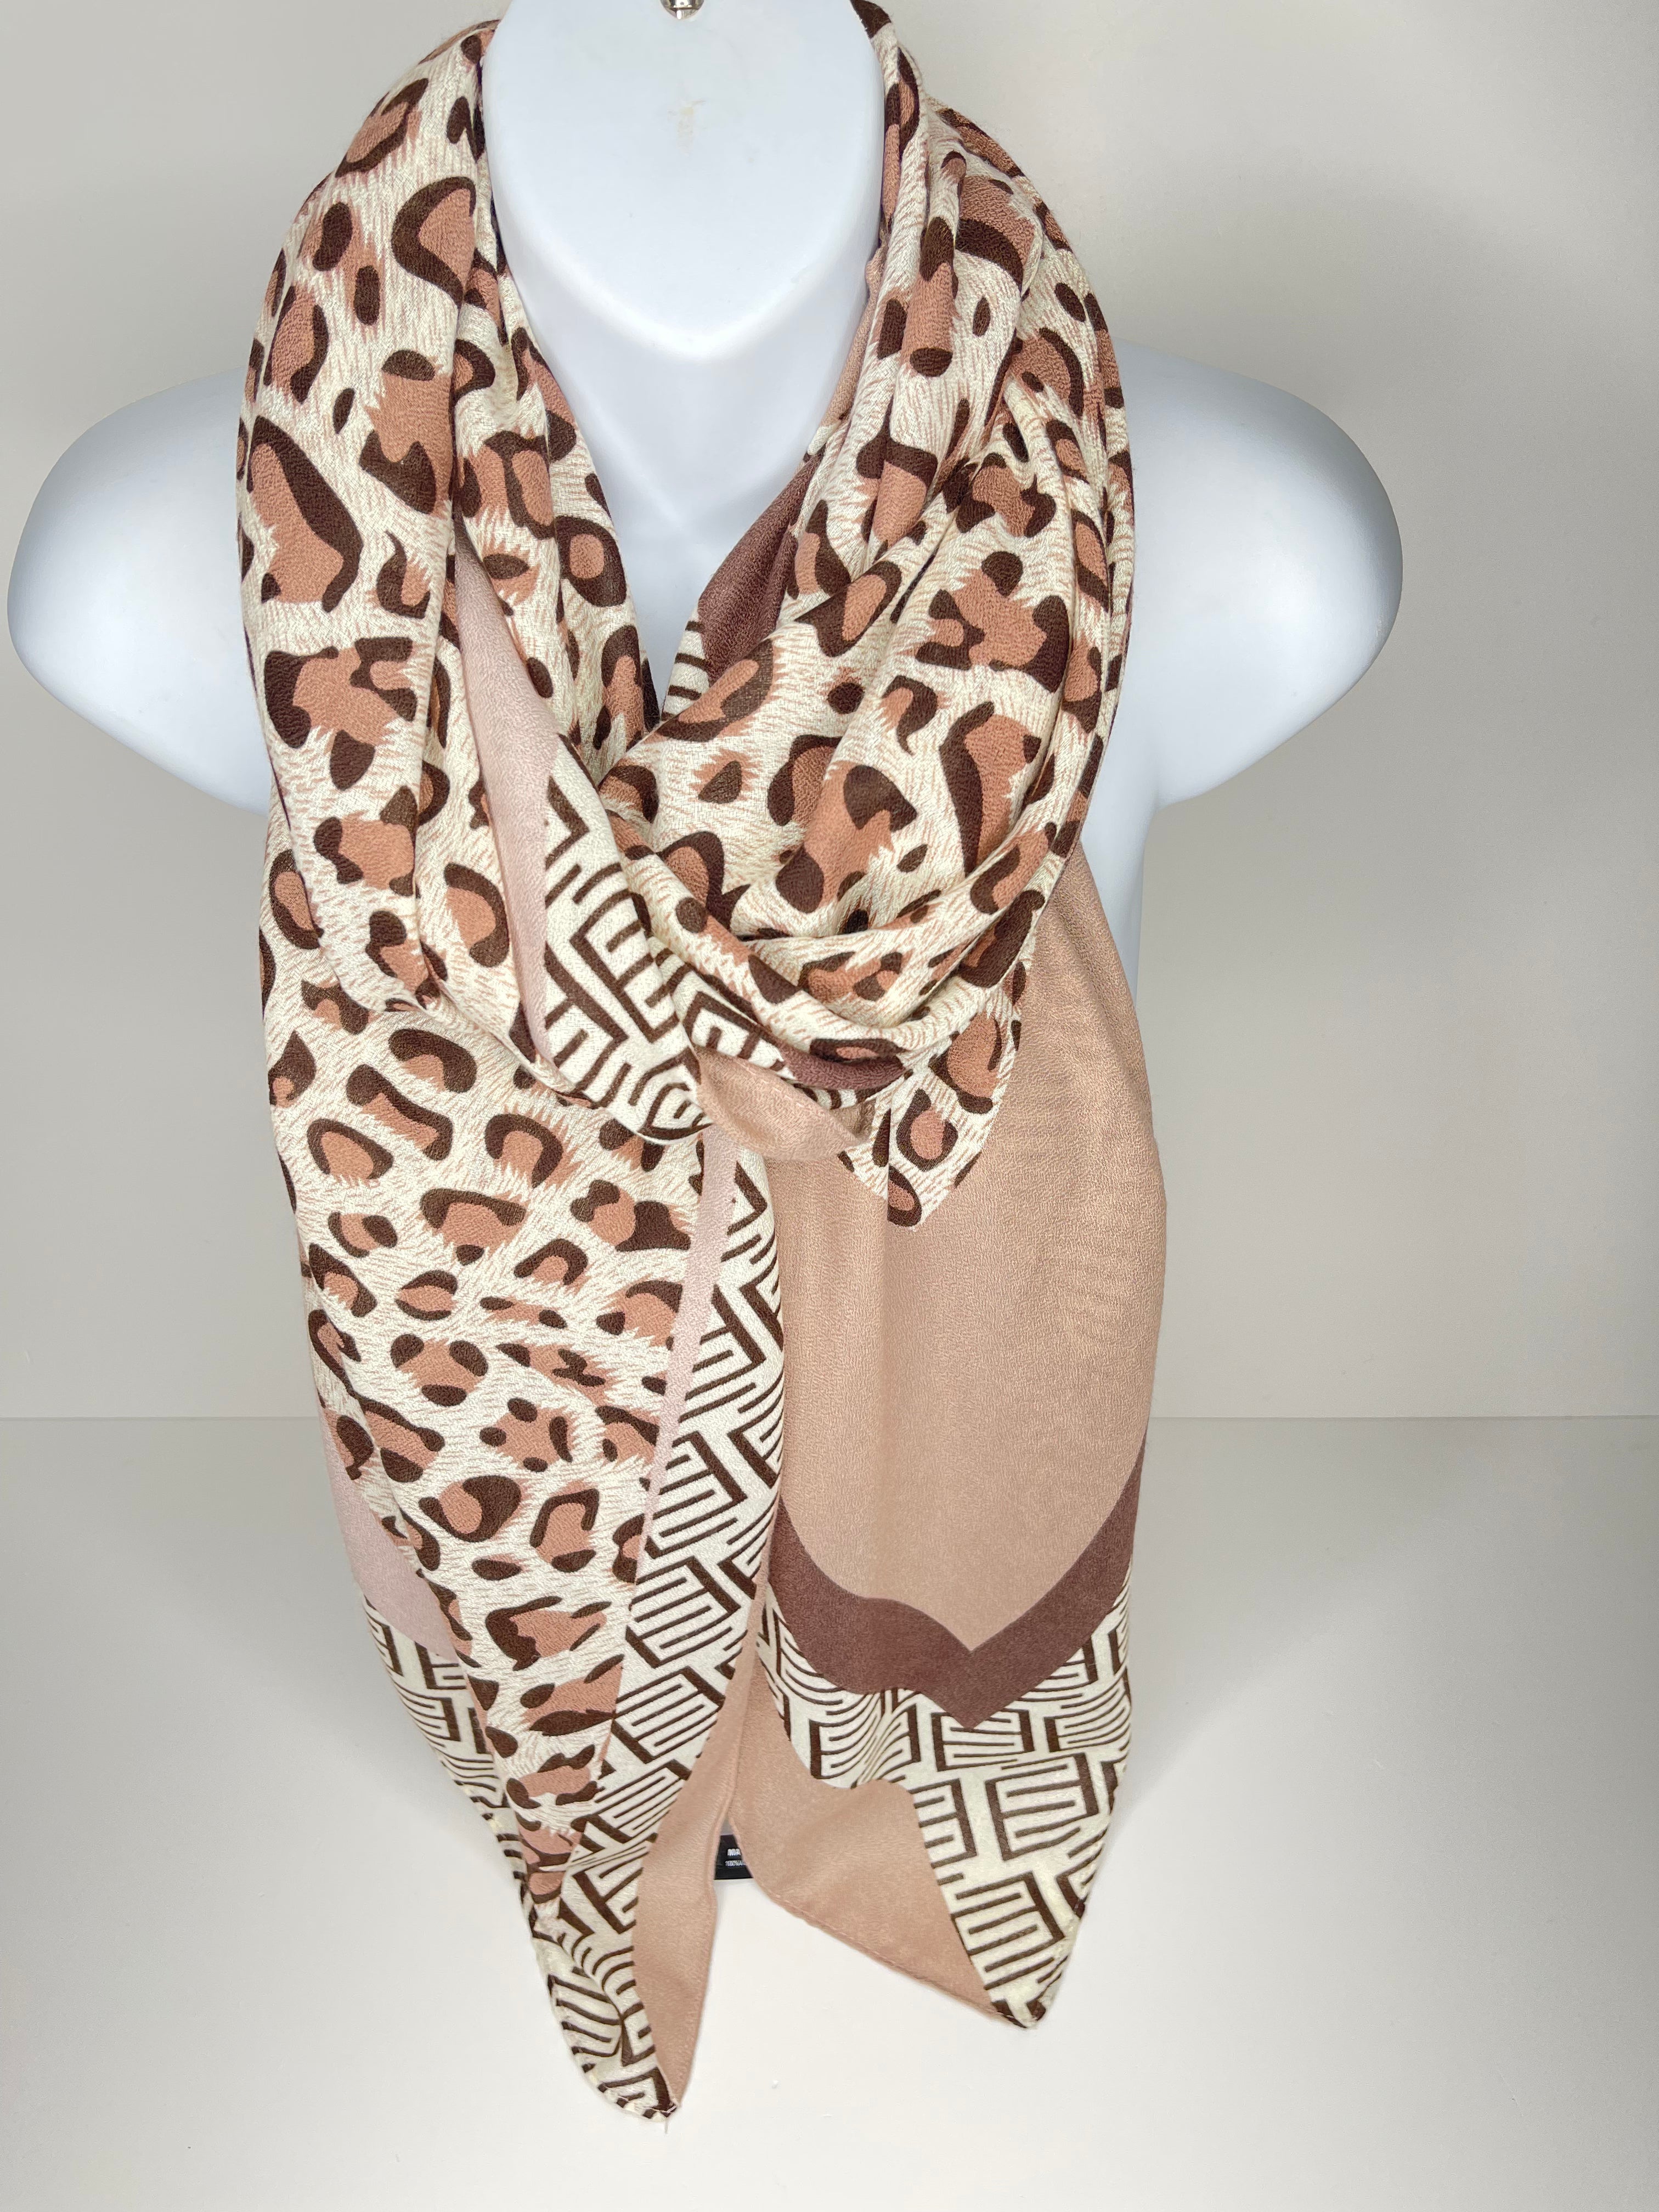 White, brown and beige leopard print scarf